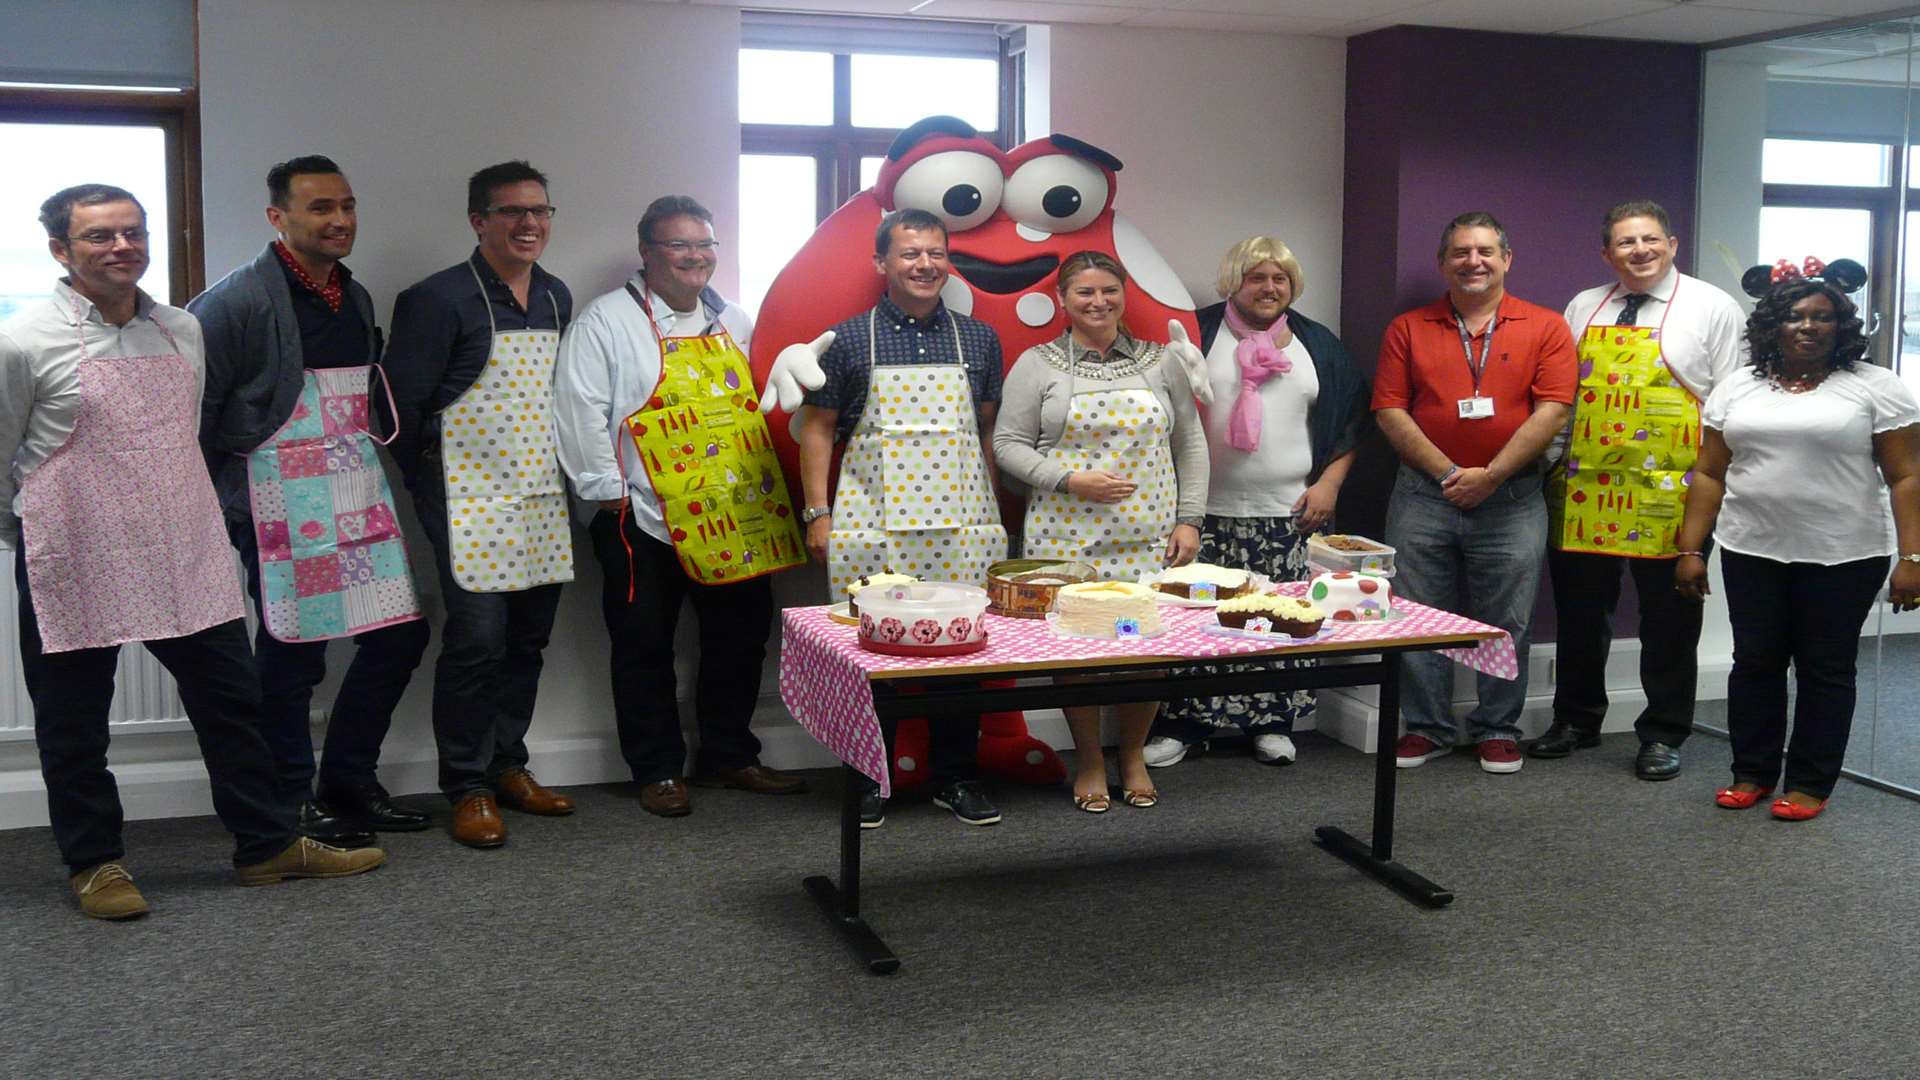 The executive team at Kent Reliance in a bake off for Demelza Hospice Care for Children